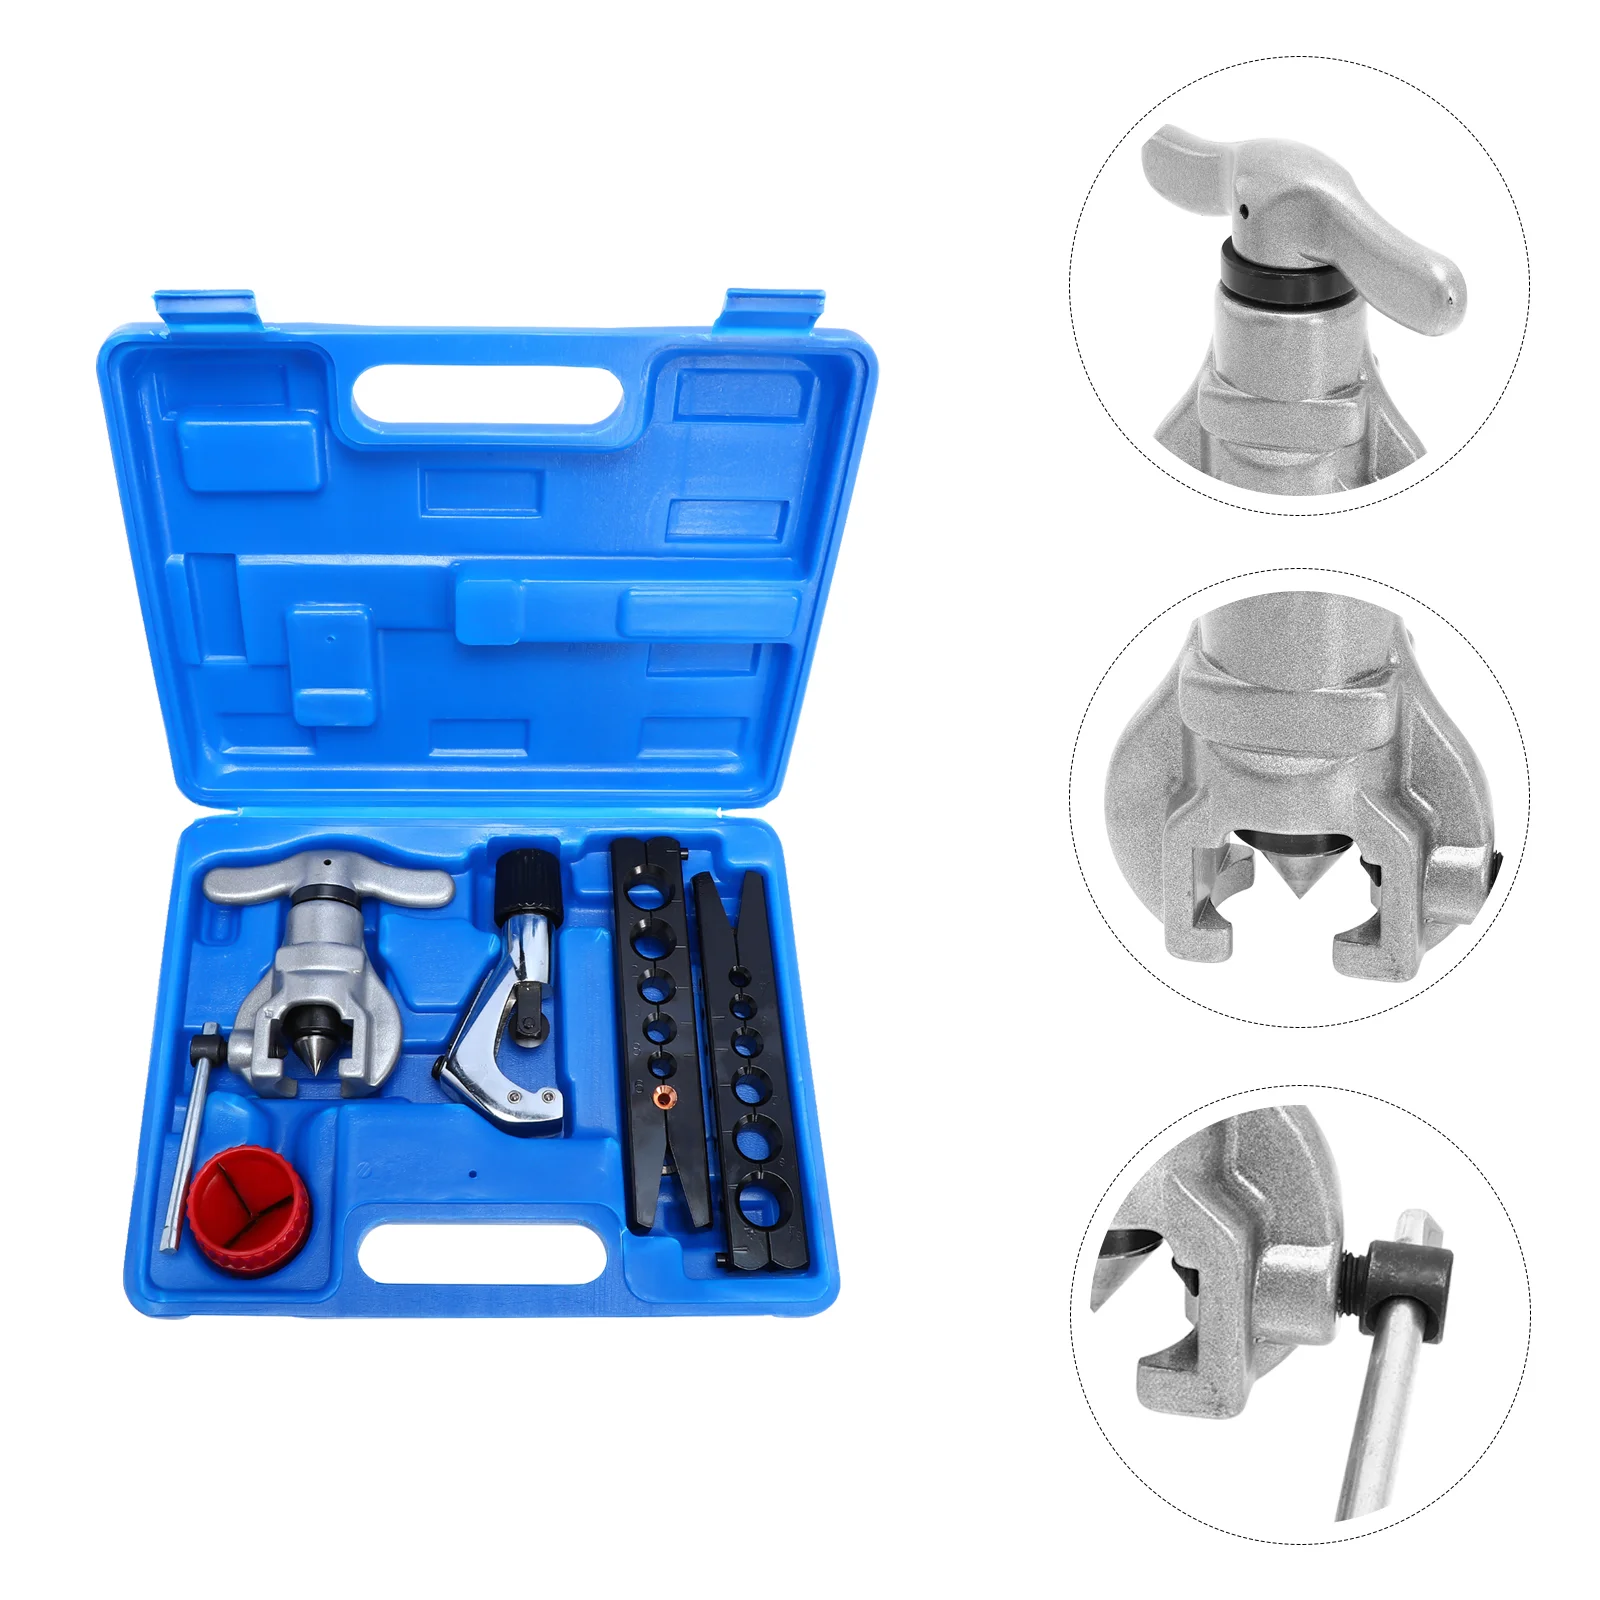 Pipe Flaring Kit Tube Eccentric Cone Flaring Tool Set for Copper Aluminum and Other Tubes 